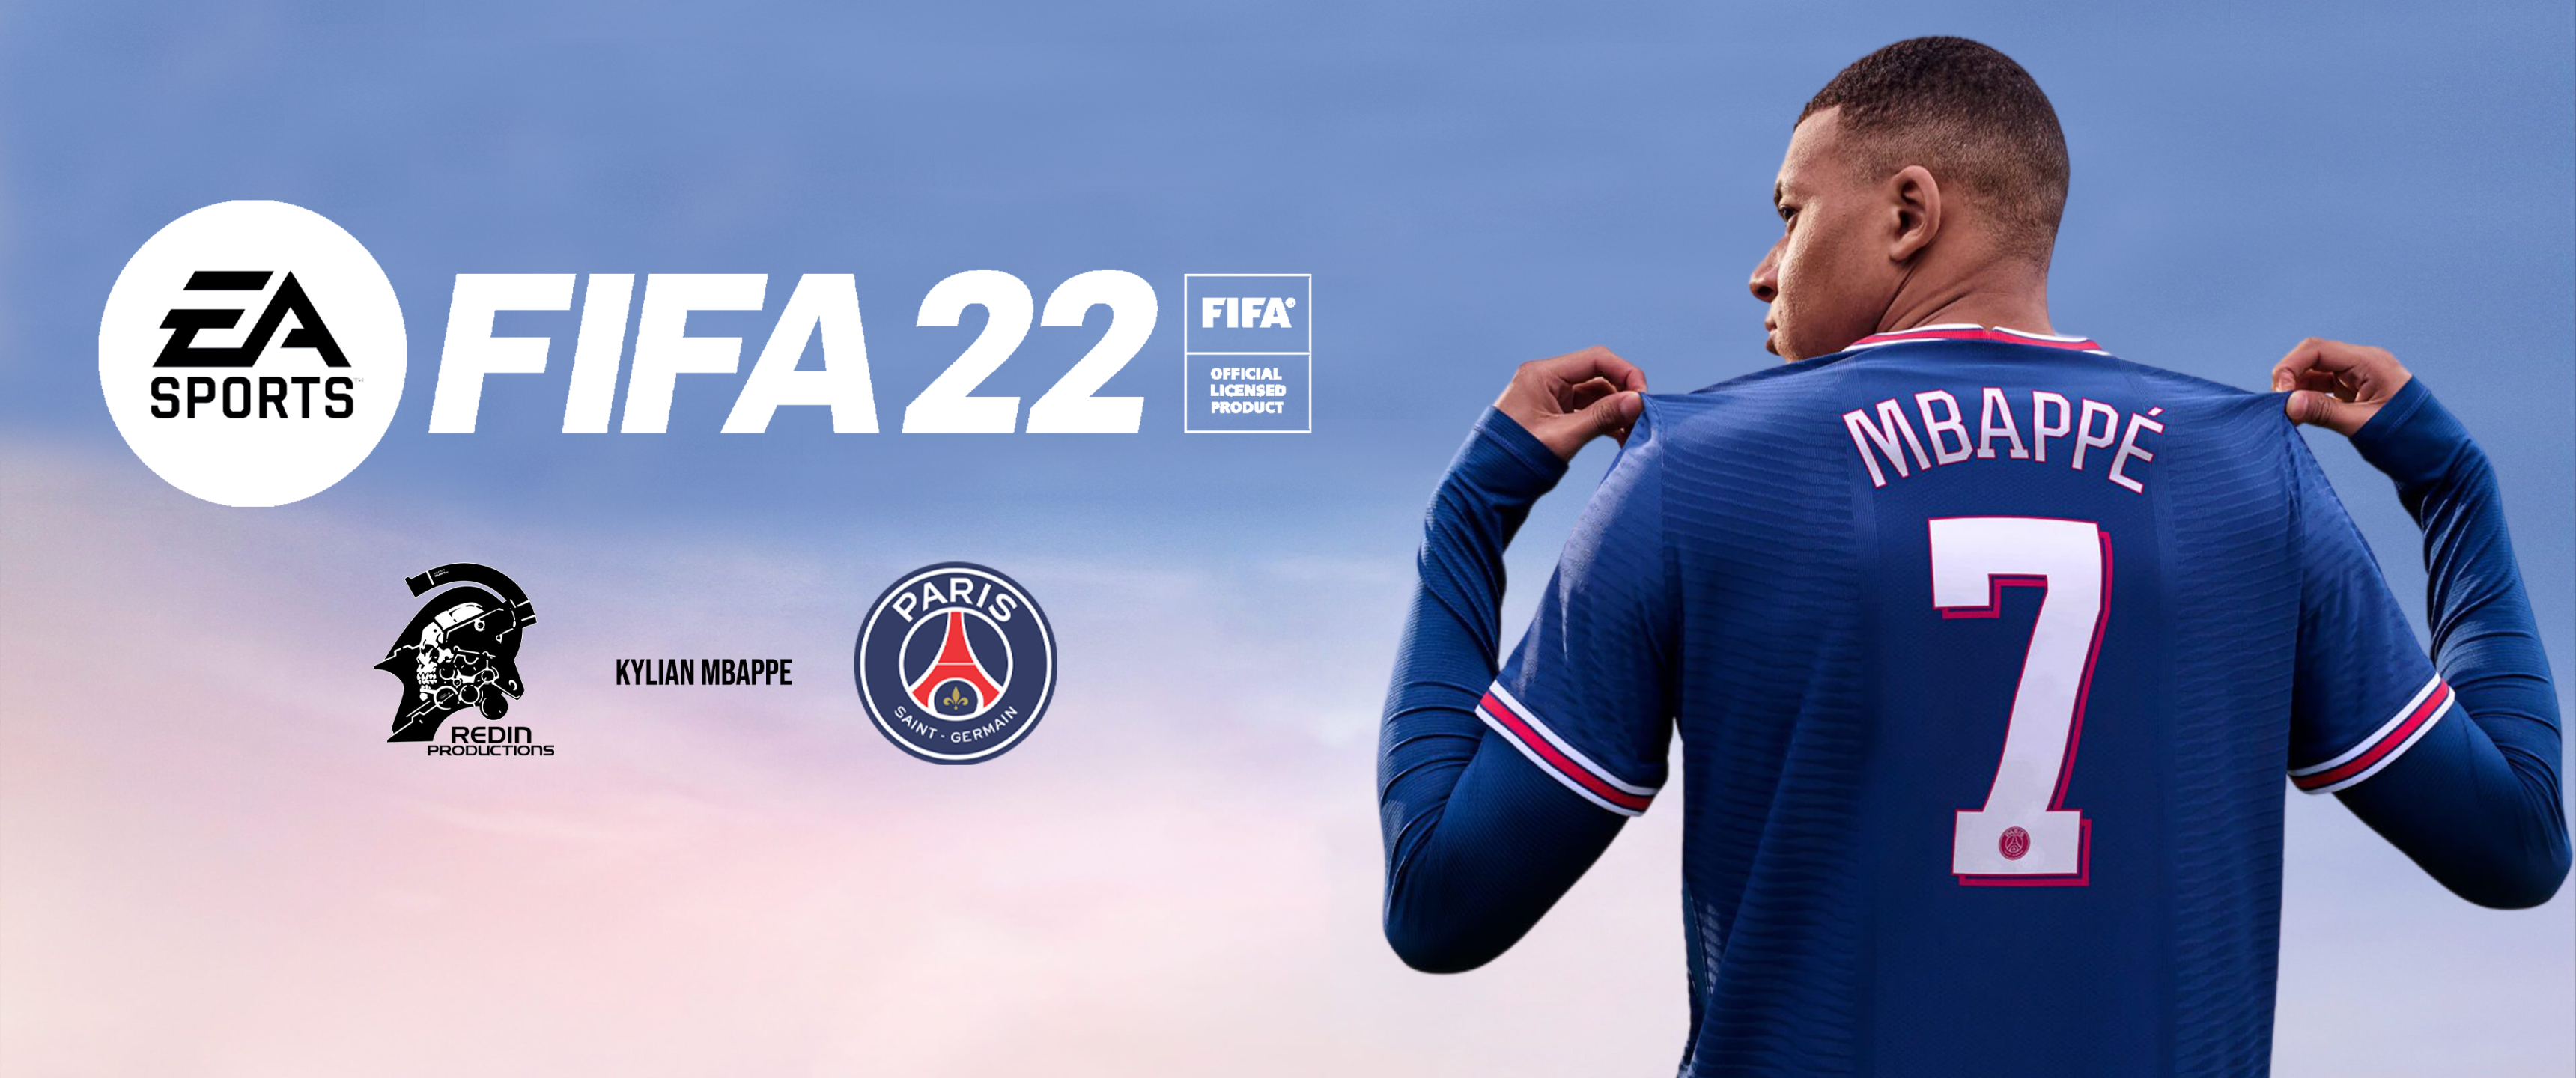 3440x1440 Kylian Mbappe Fifa 22 4k 3440x1440 Resolution Wallpaper Hd Sports 4k Wallpapers Images Photos And Background Wallpapers Den